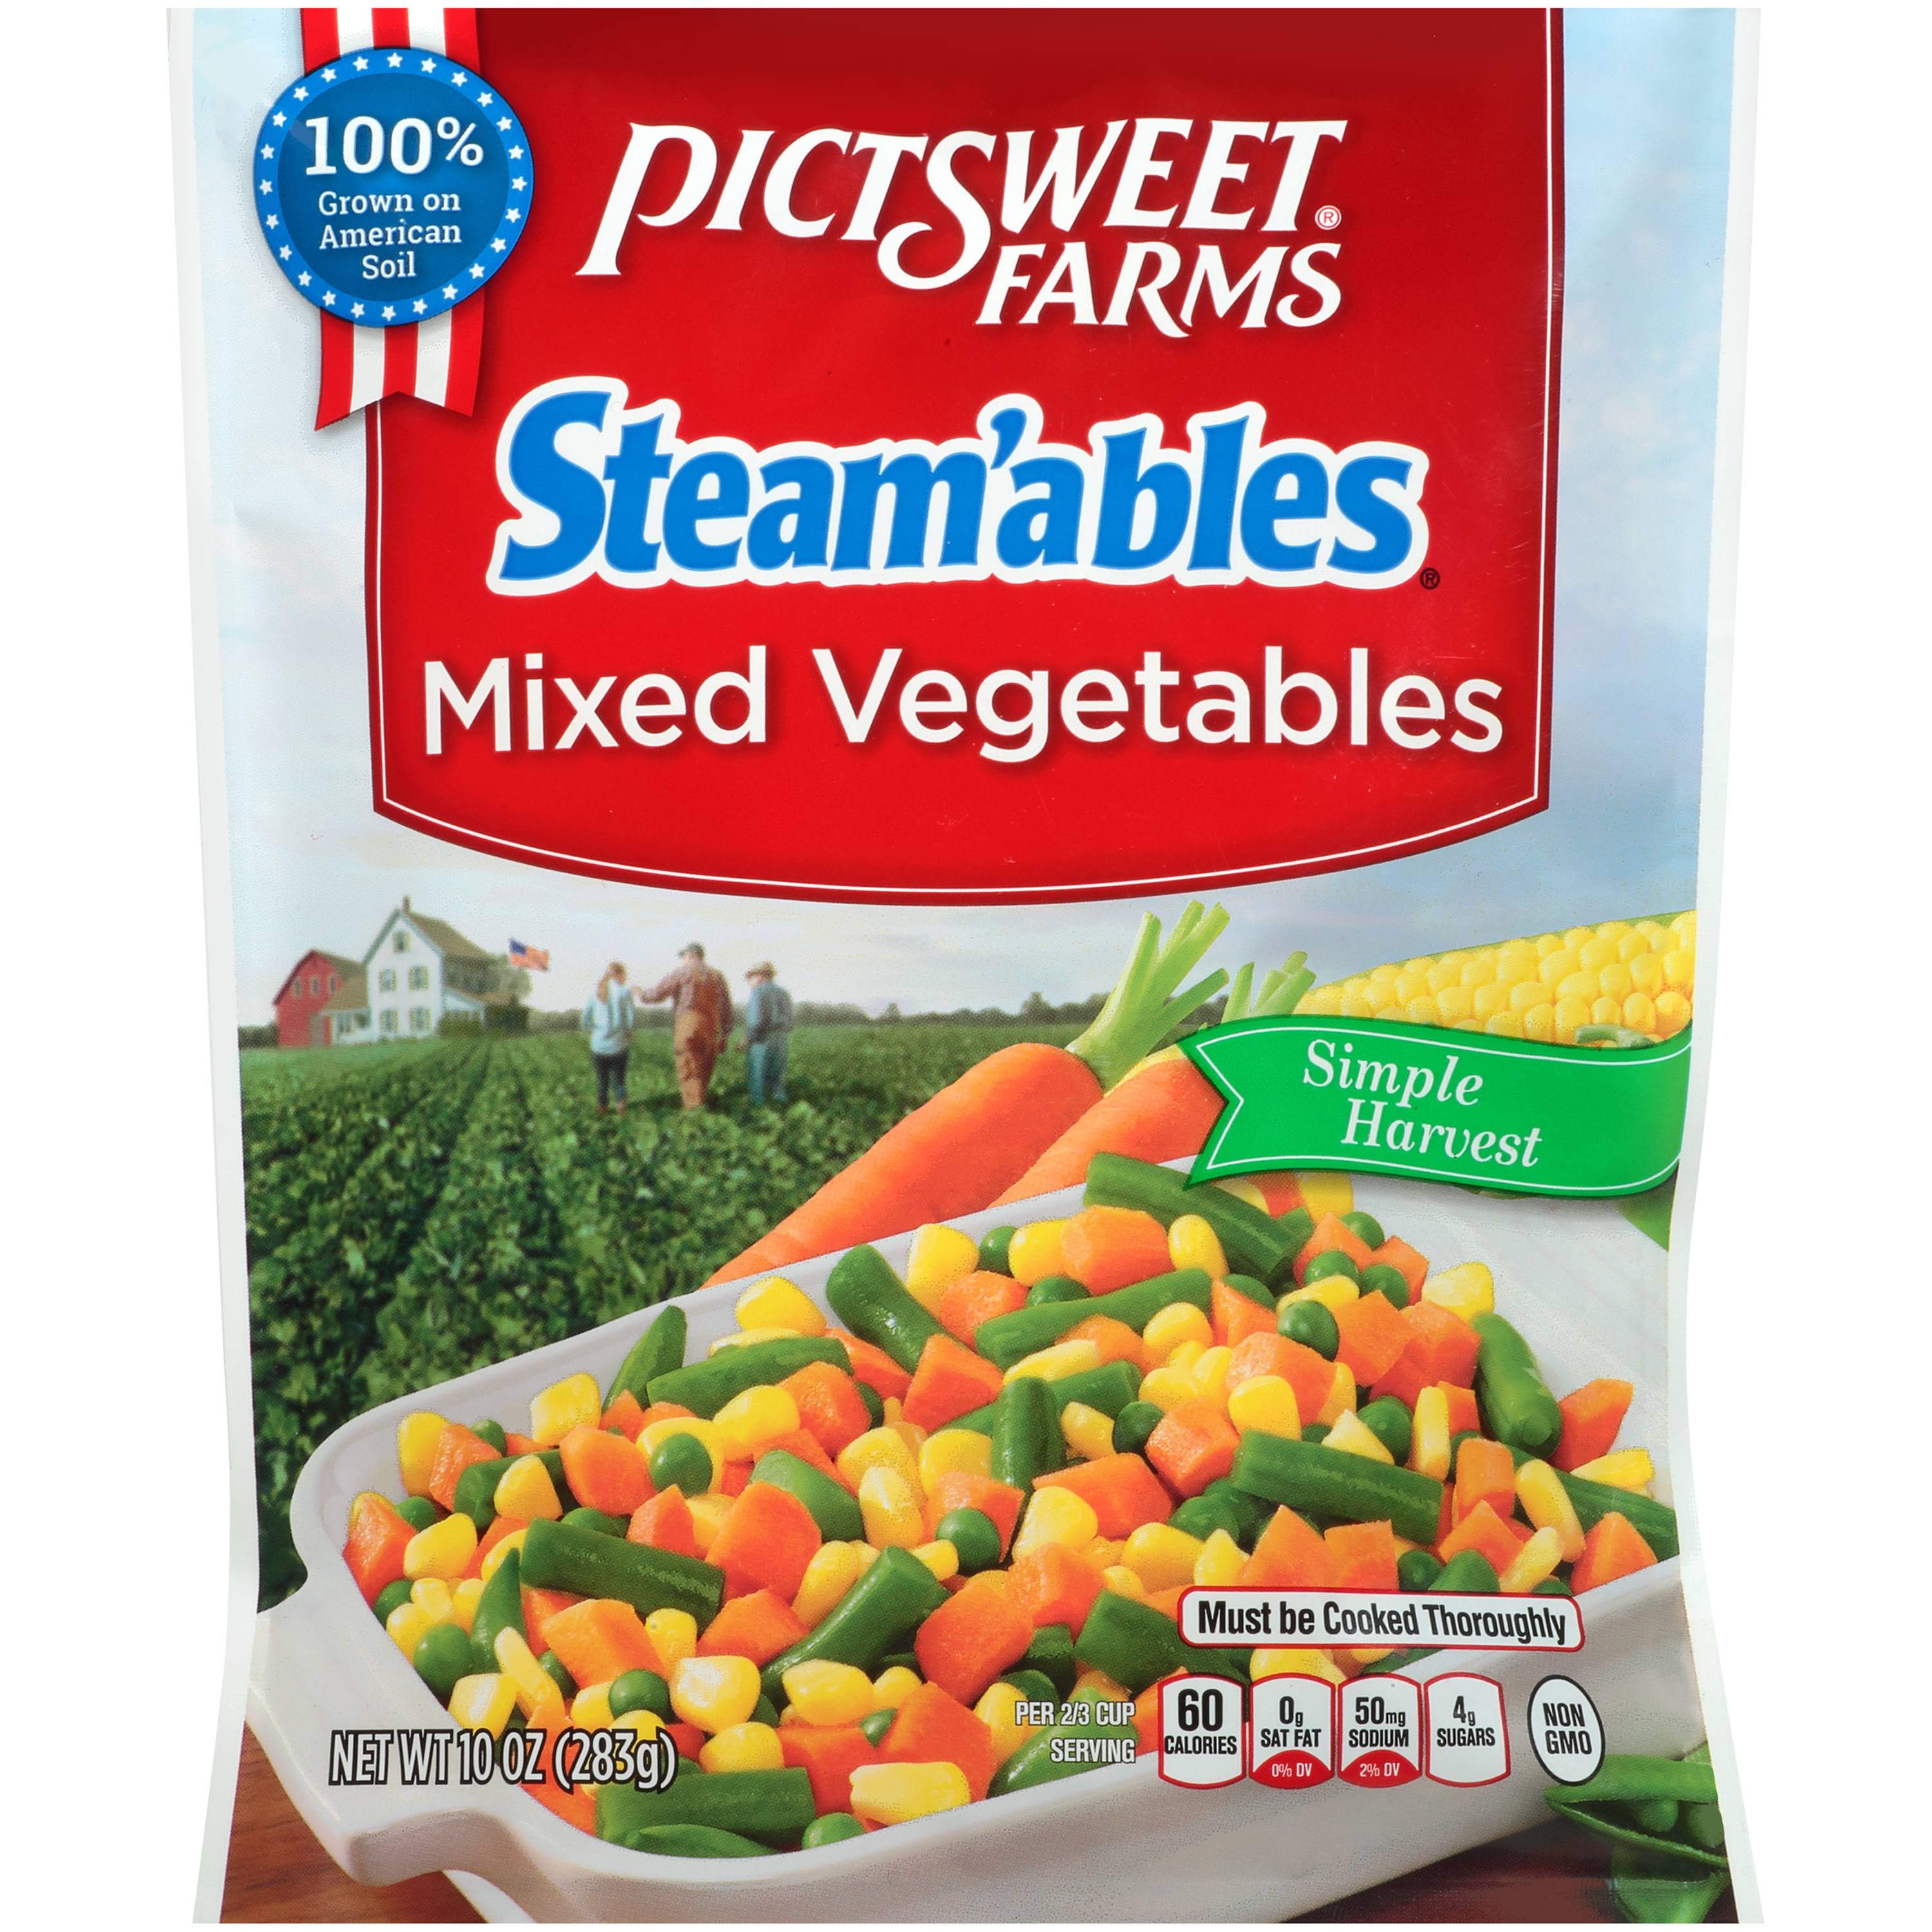 Pictsweet Farms Steam'ables Mixed Vegetables - 10 oz